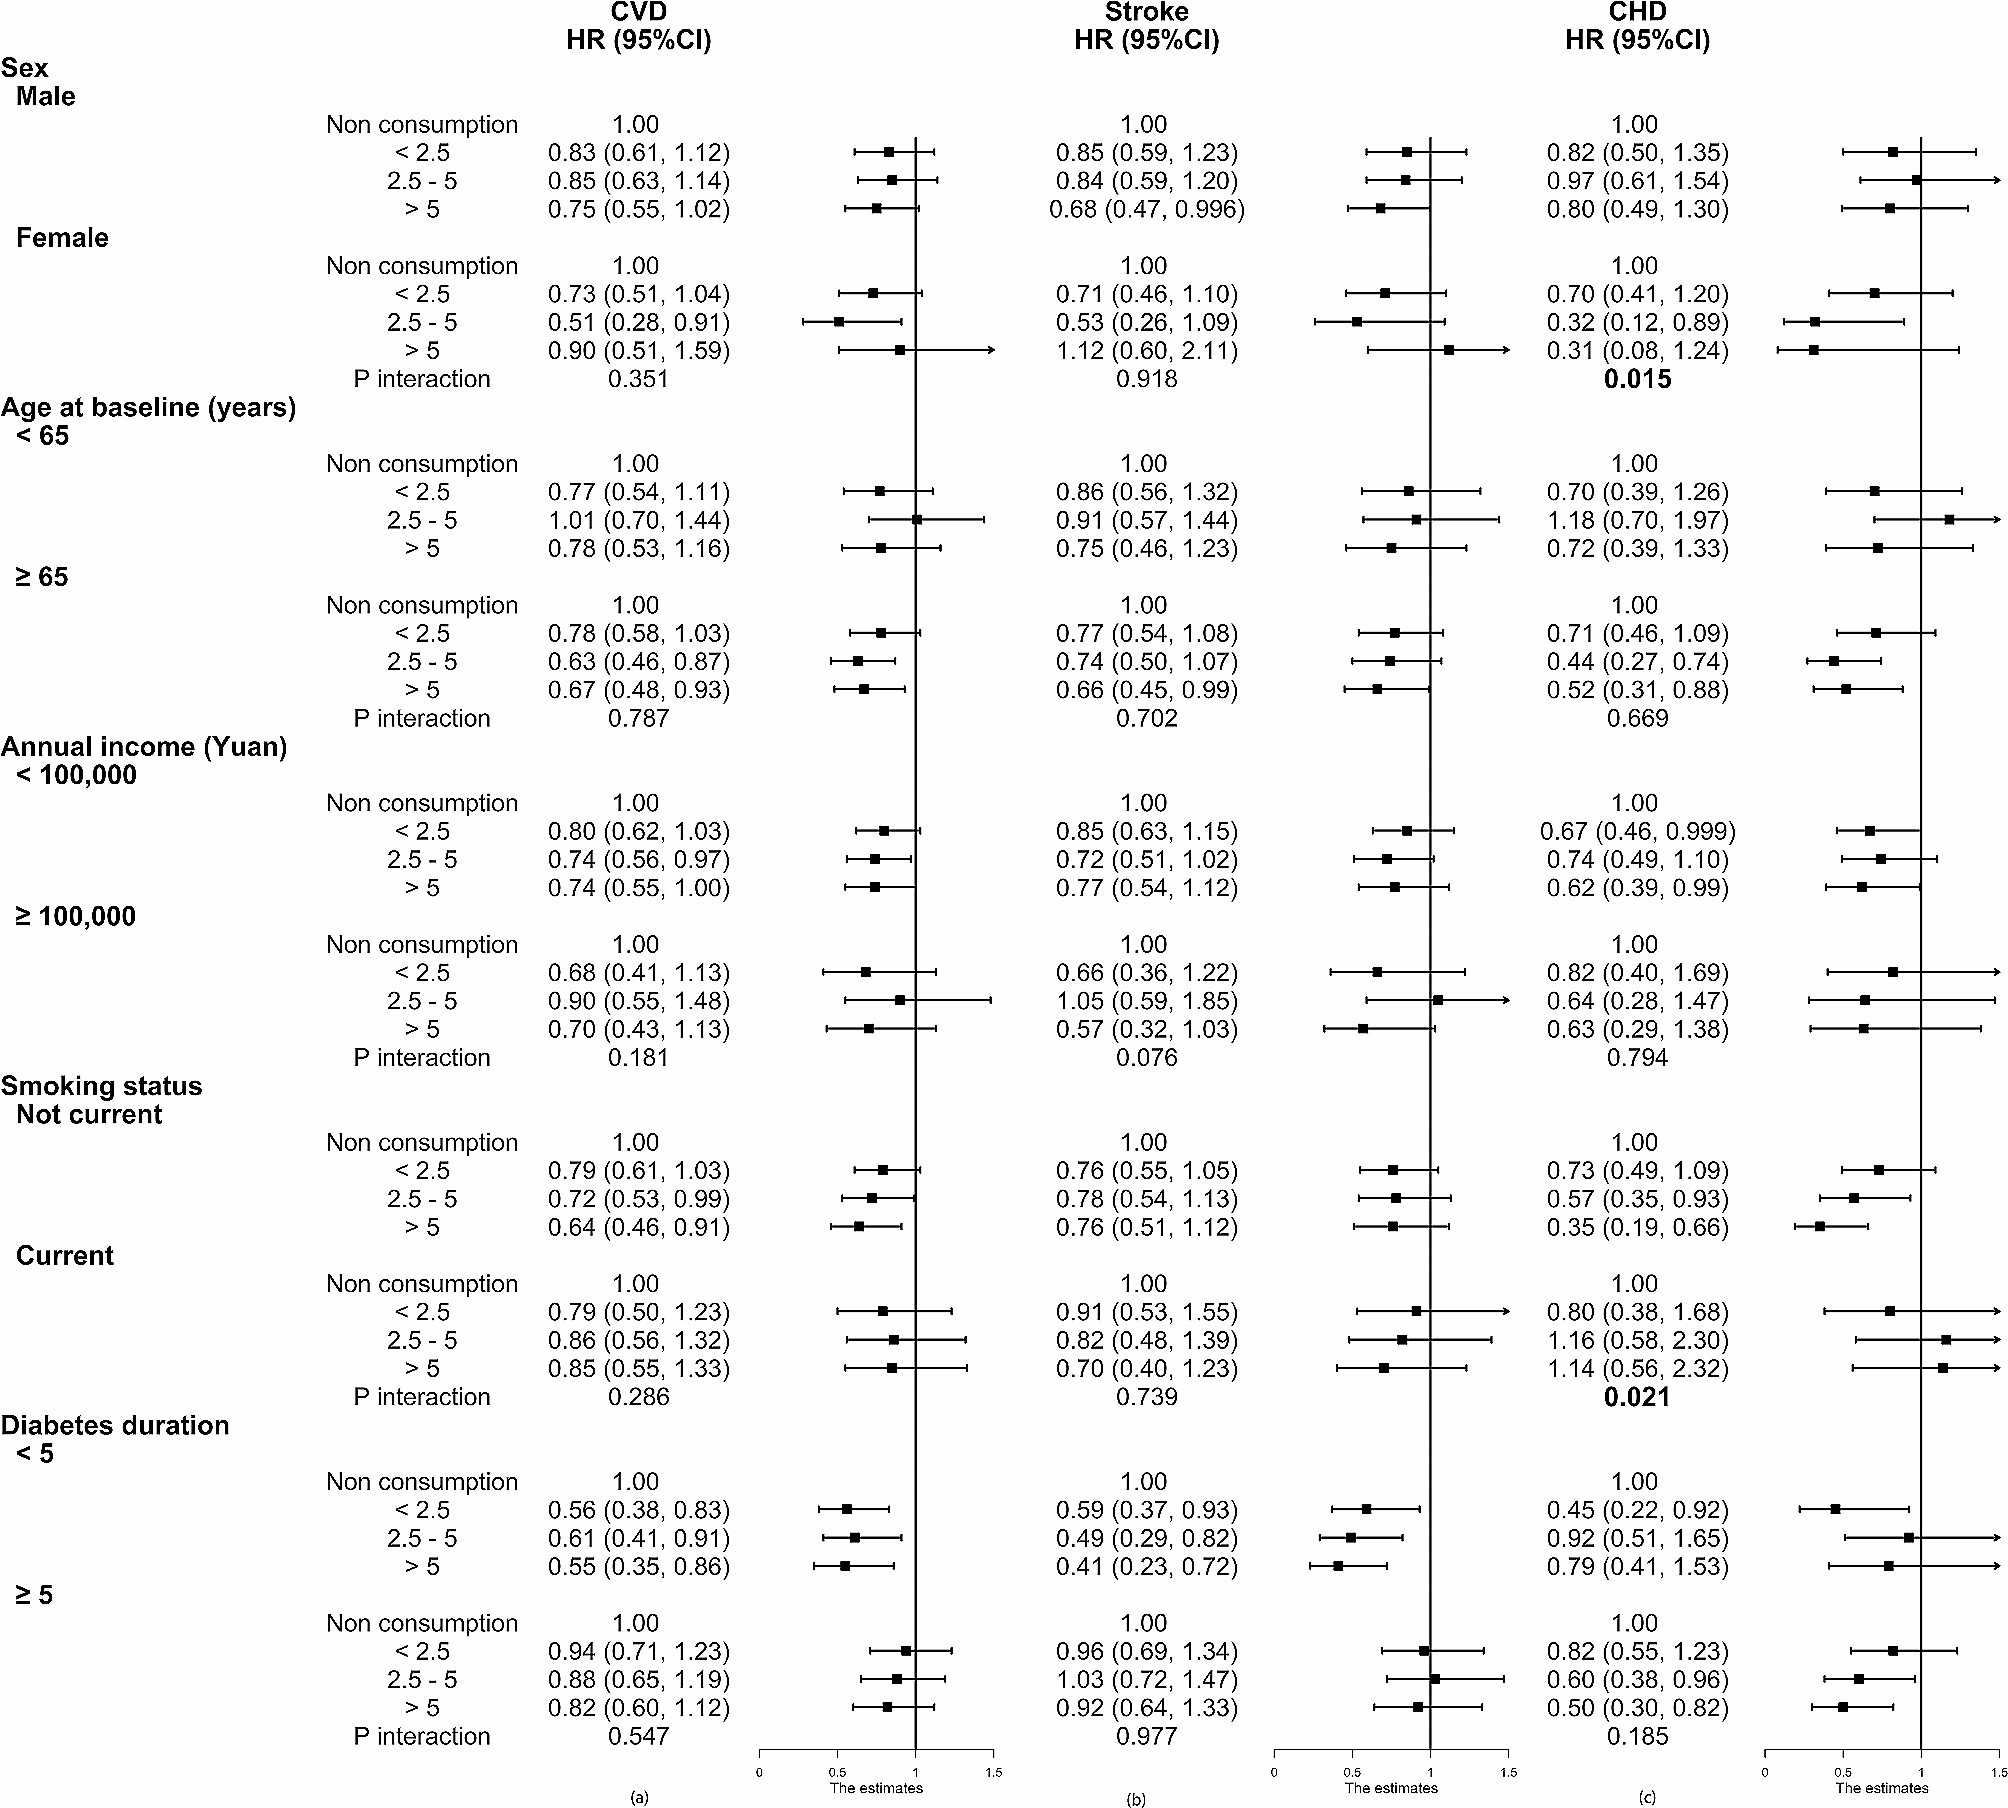 Green tea consumption and incidence of cardiovascular disease in type 2 diabetic patients with overweight/obesity: a community-based cohort study